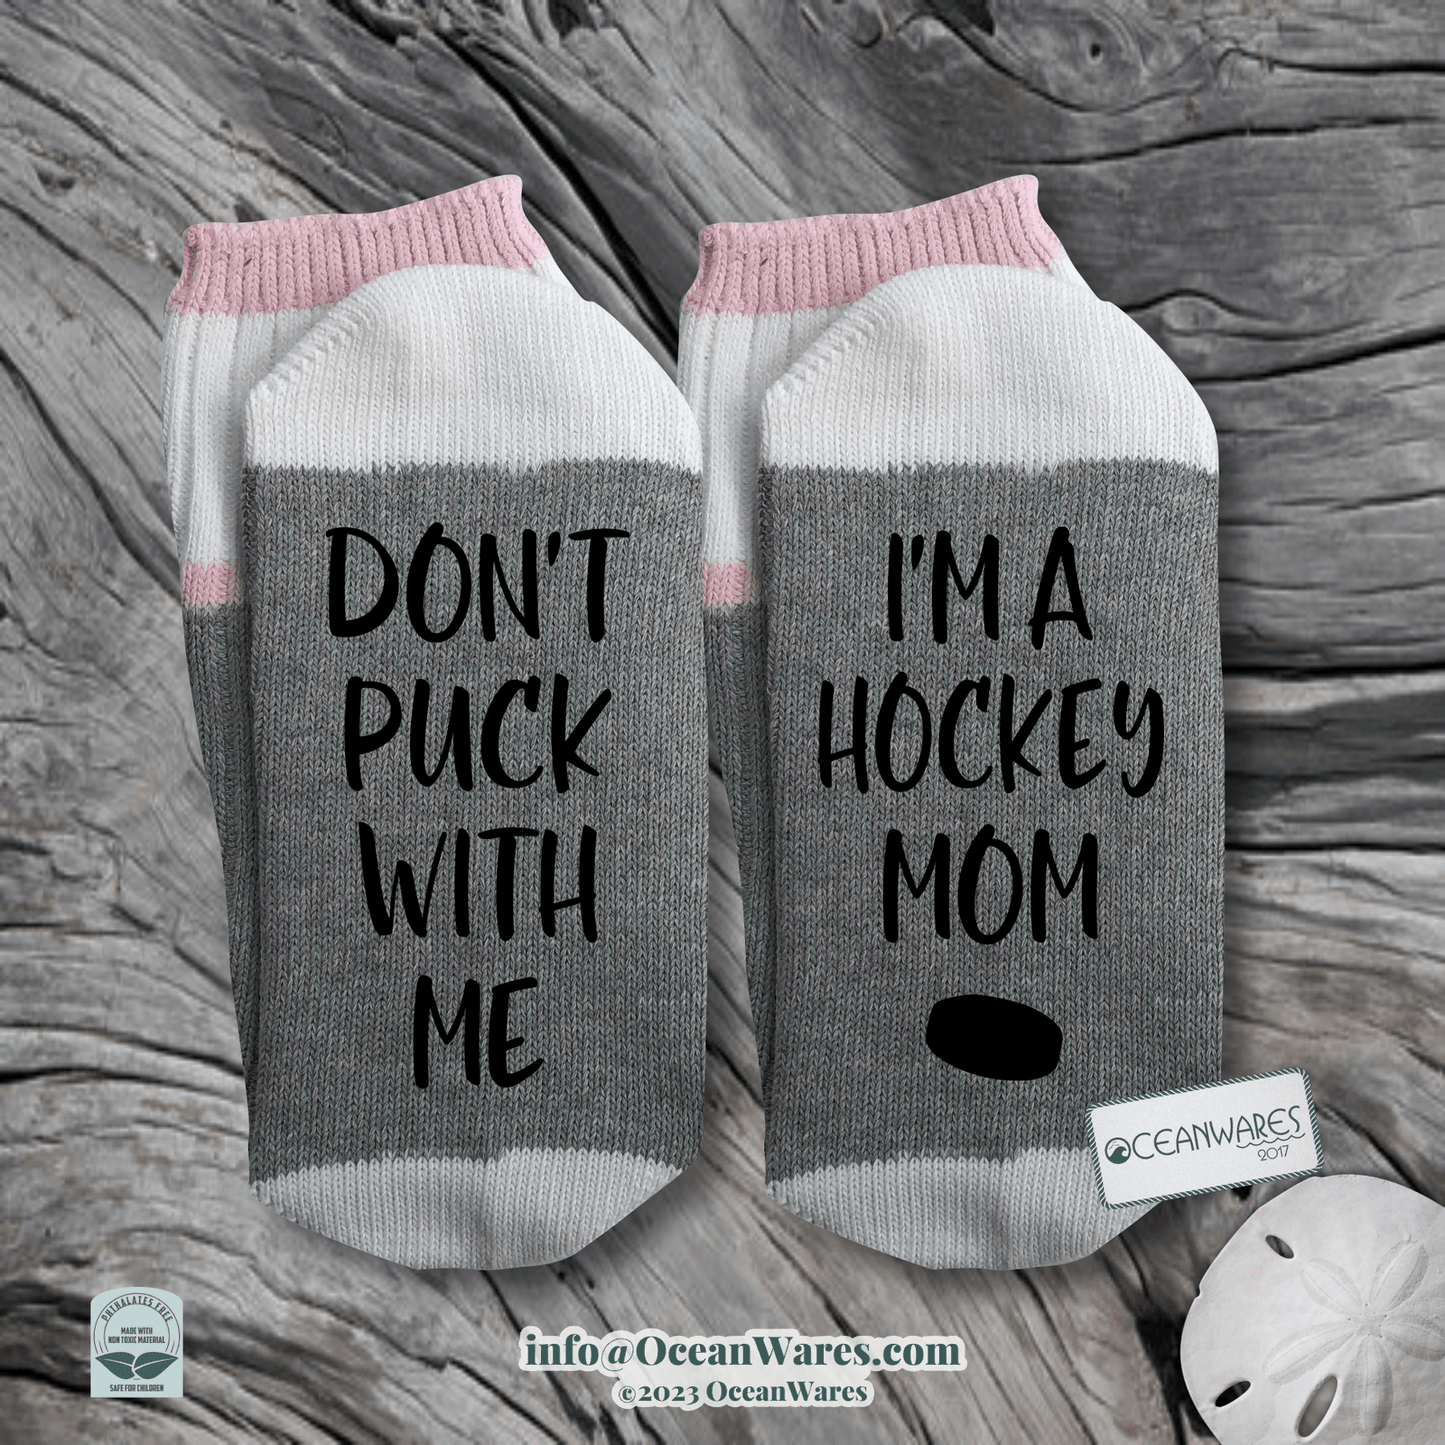 Don't Puck with Me, I'm a Hockey Mom, SUPER SOFT NOVELTY WORD SOCKS.